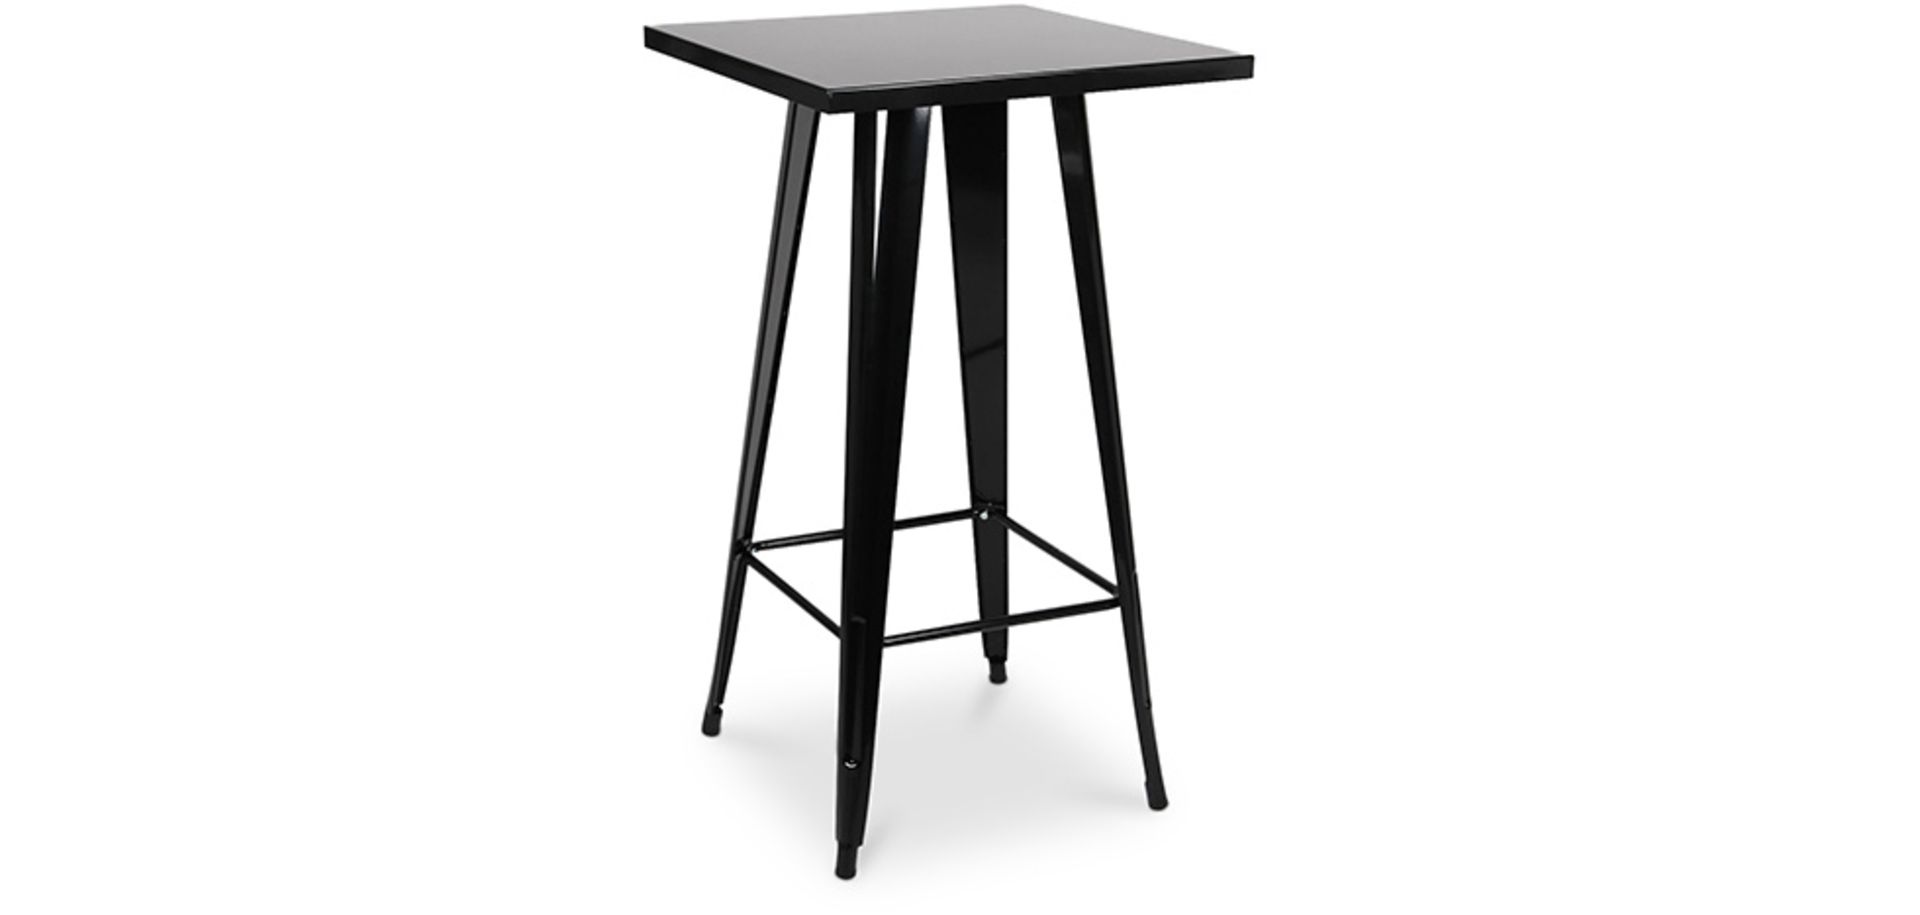 1 x Tolix Industrial Style Outdoor Bar Table and Bar Stool Set in Black - Includes 1 x Bar Table and - Image 2 of 9